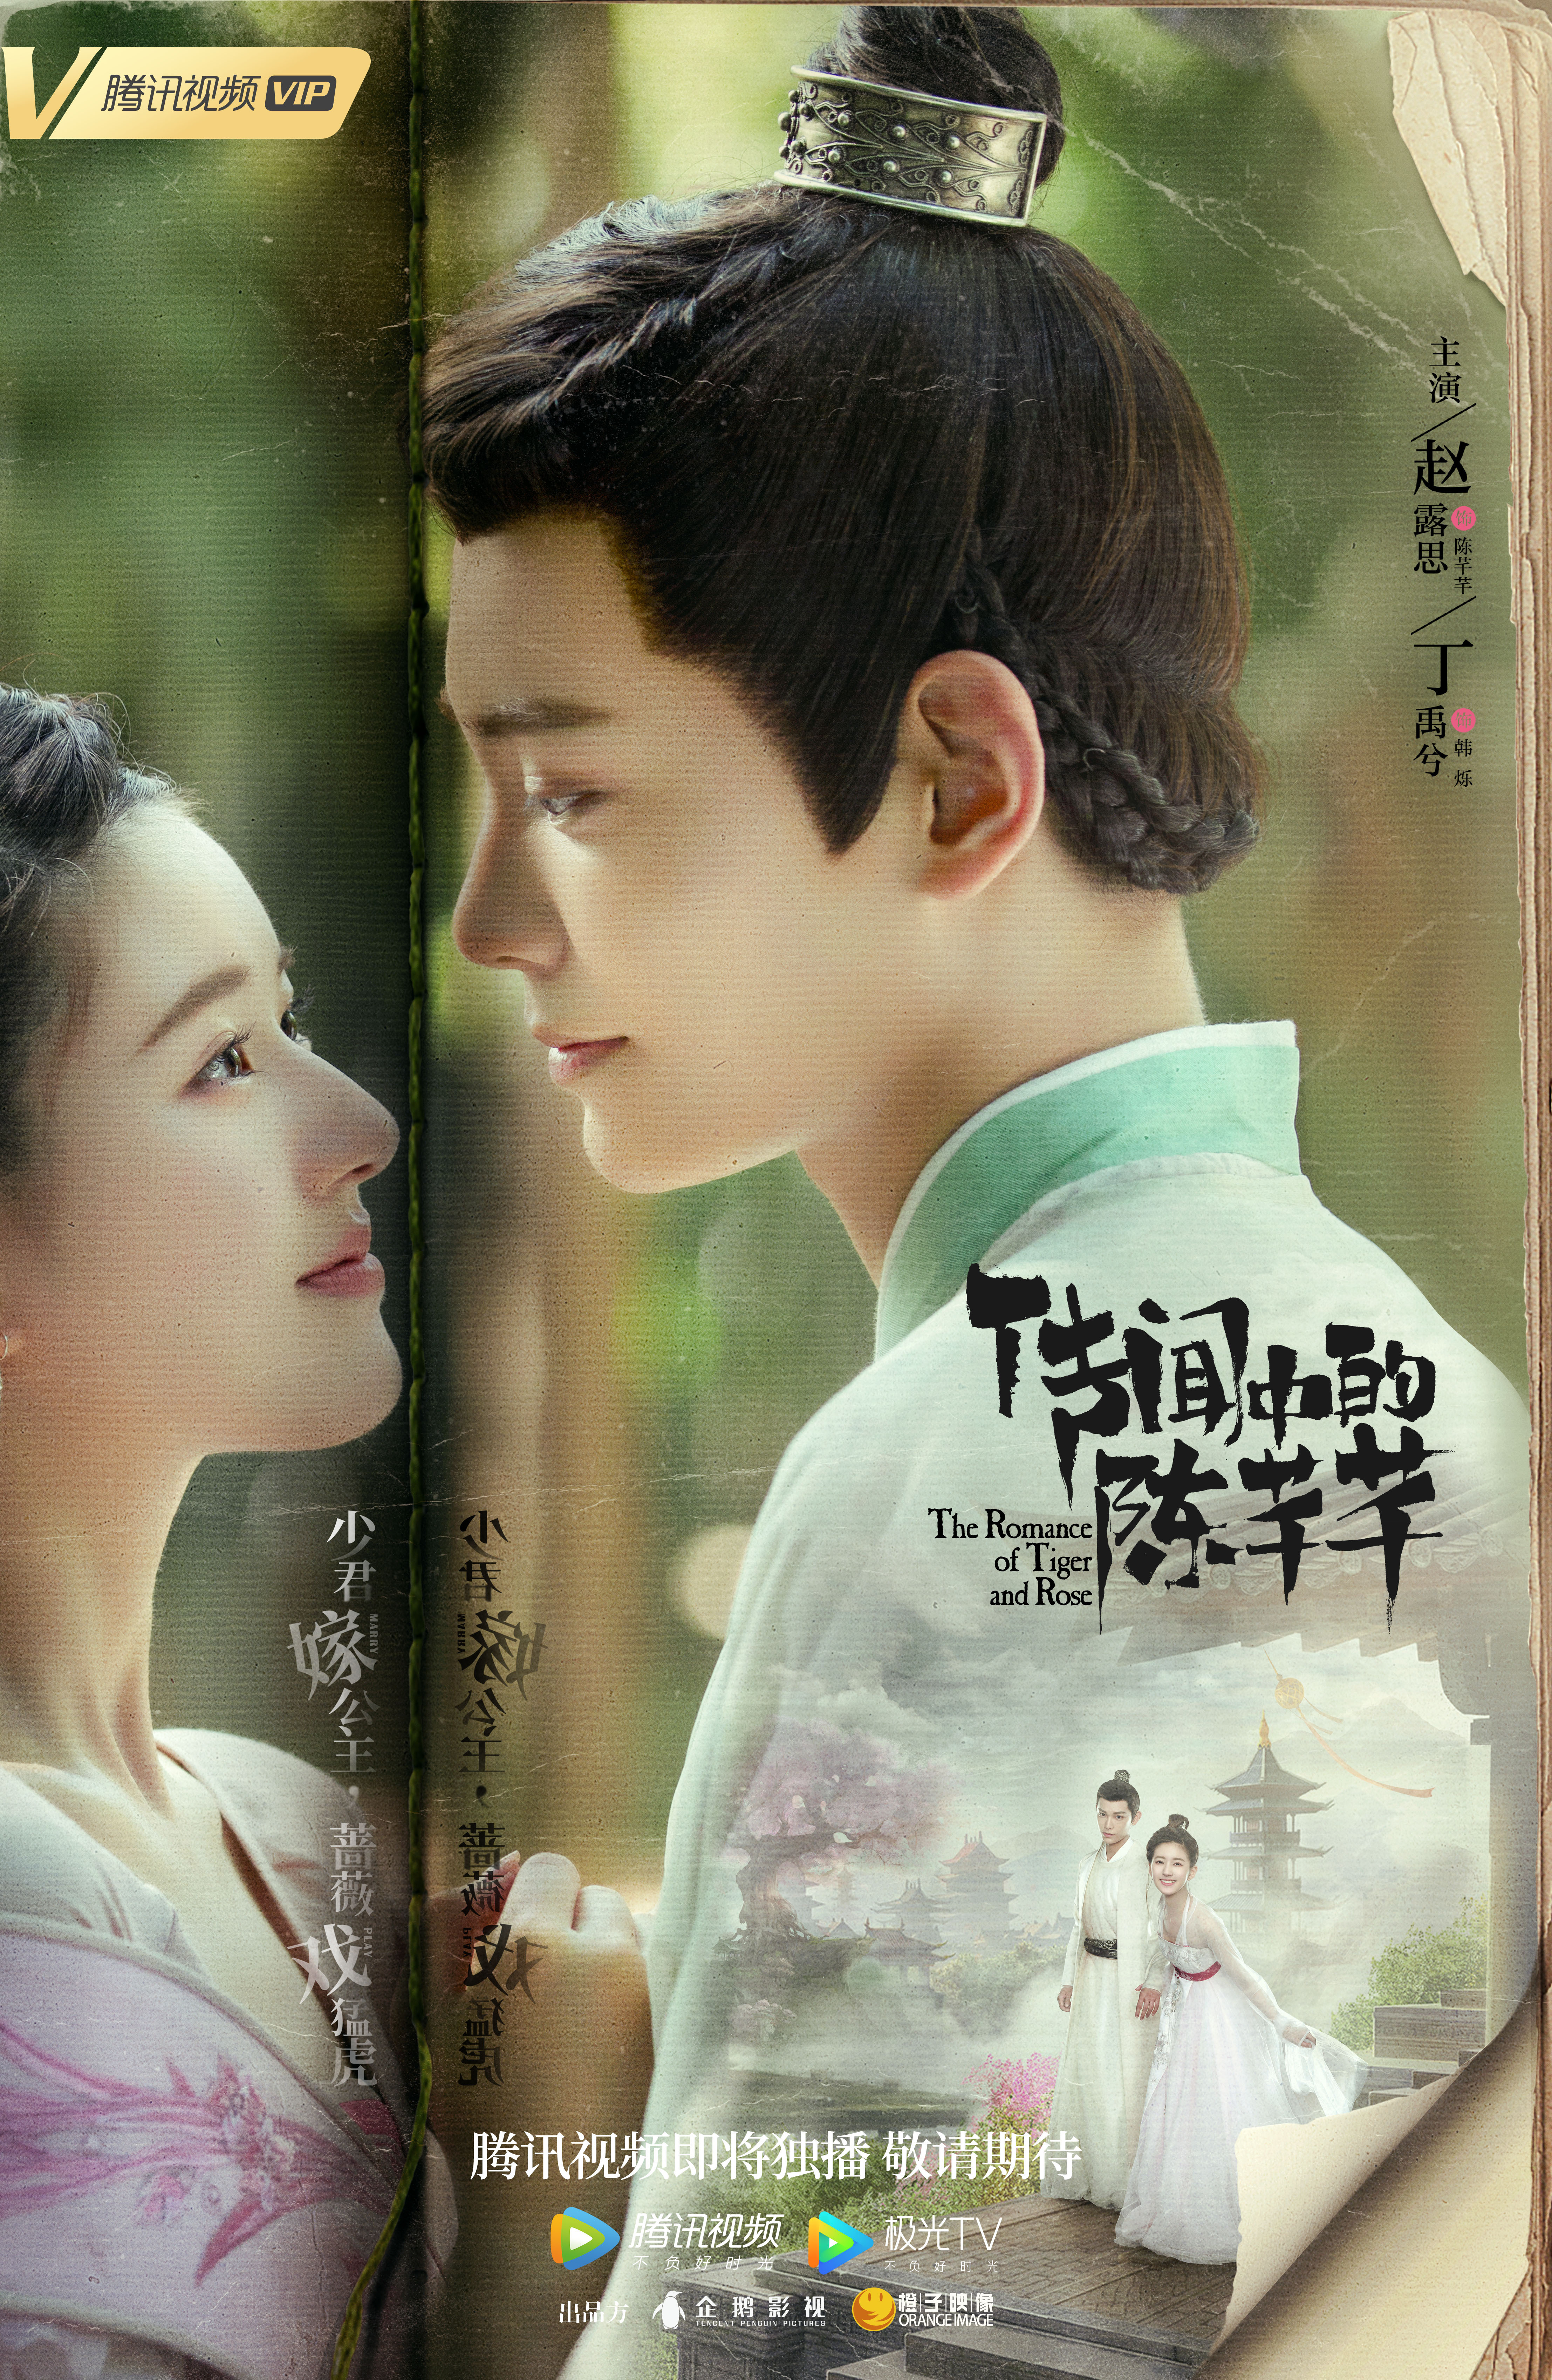 The Romance of Tiger and Rose Poster 10